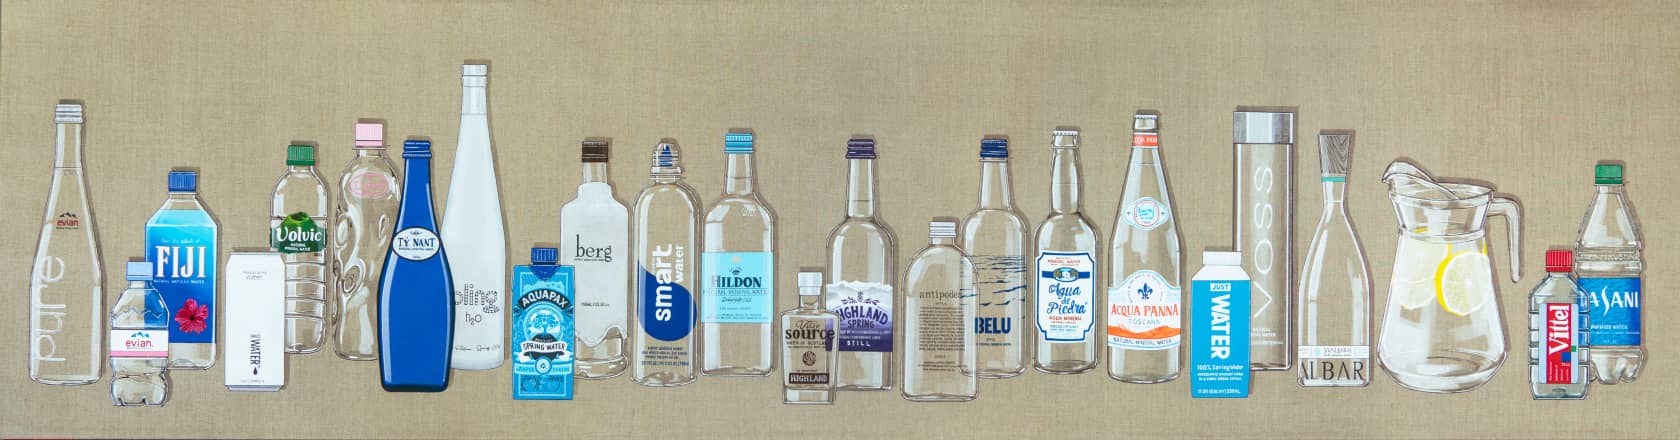 Sooyoung Chung Full of Choice - Water Acrylic on linen